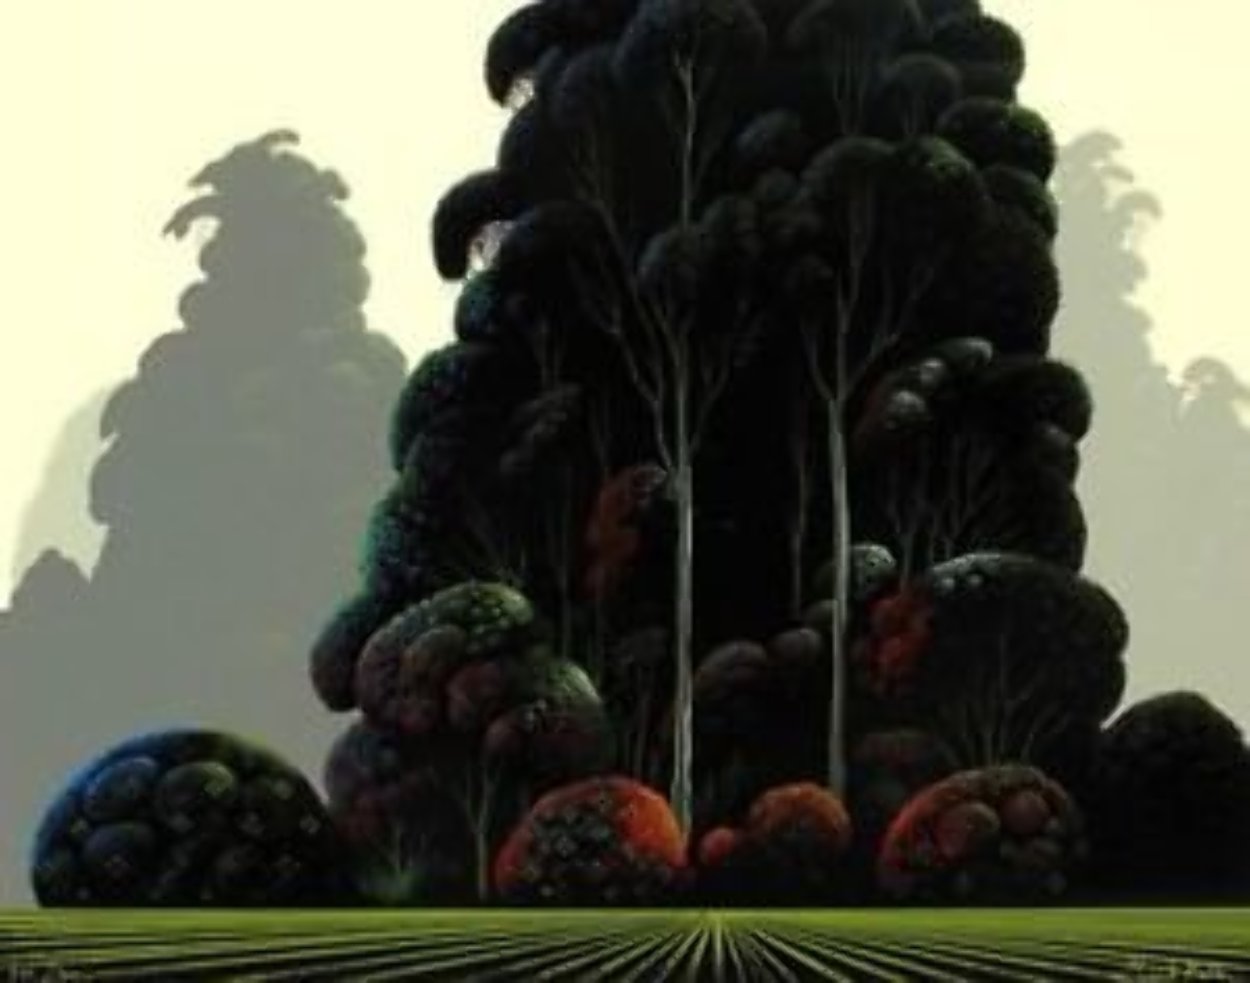 Autumn 1979 Limited Edition Print by Eyvind Earle